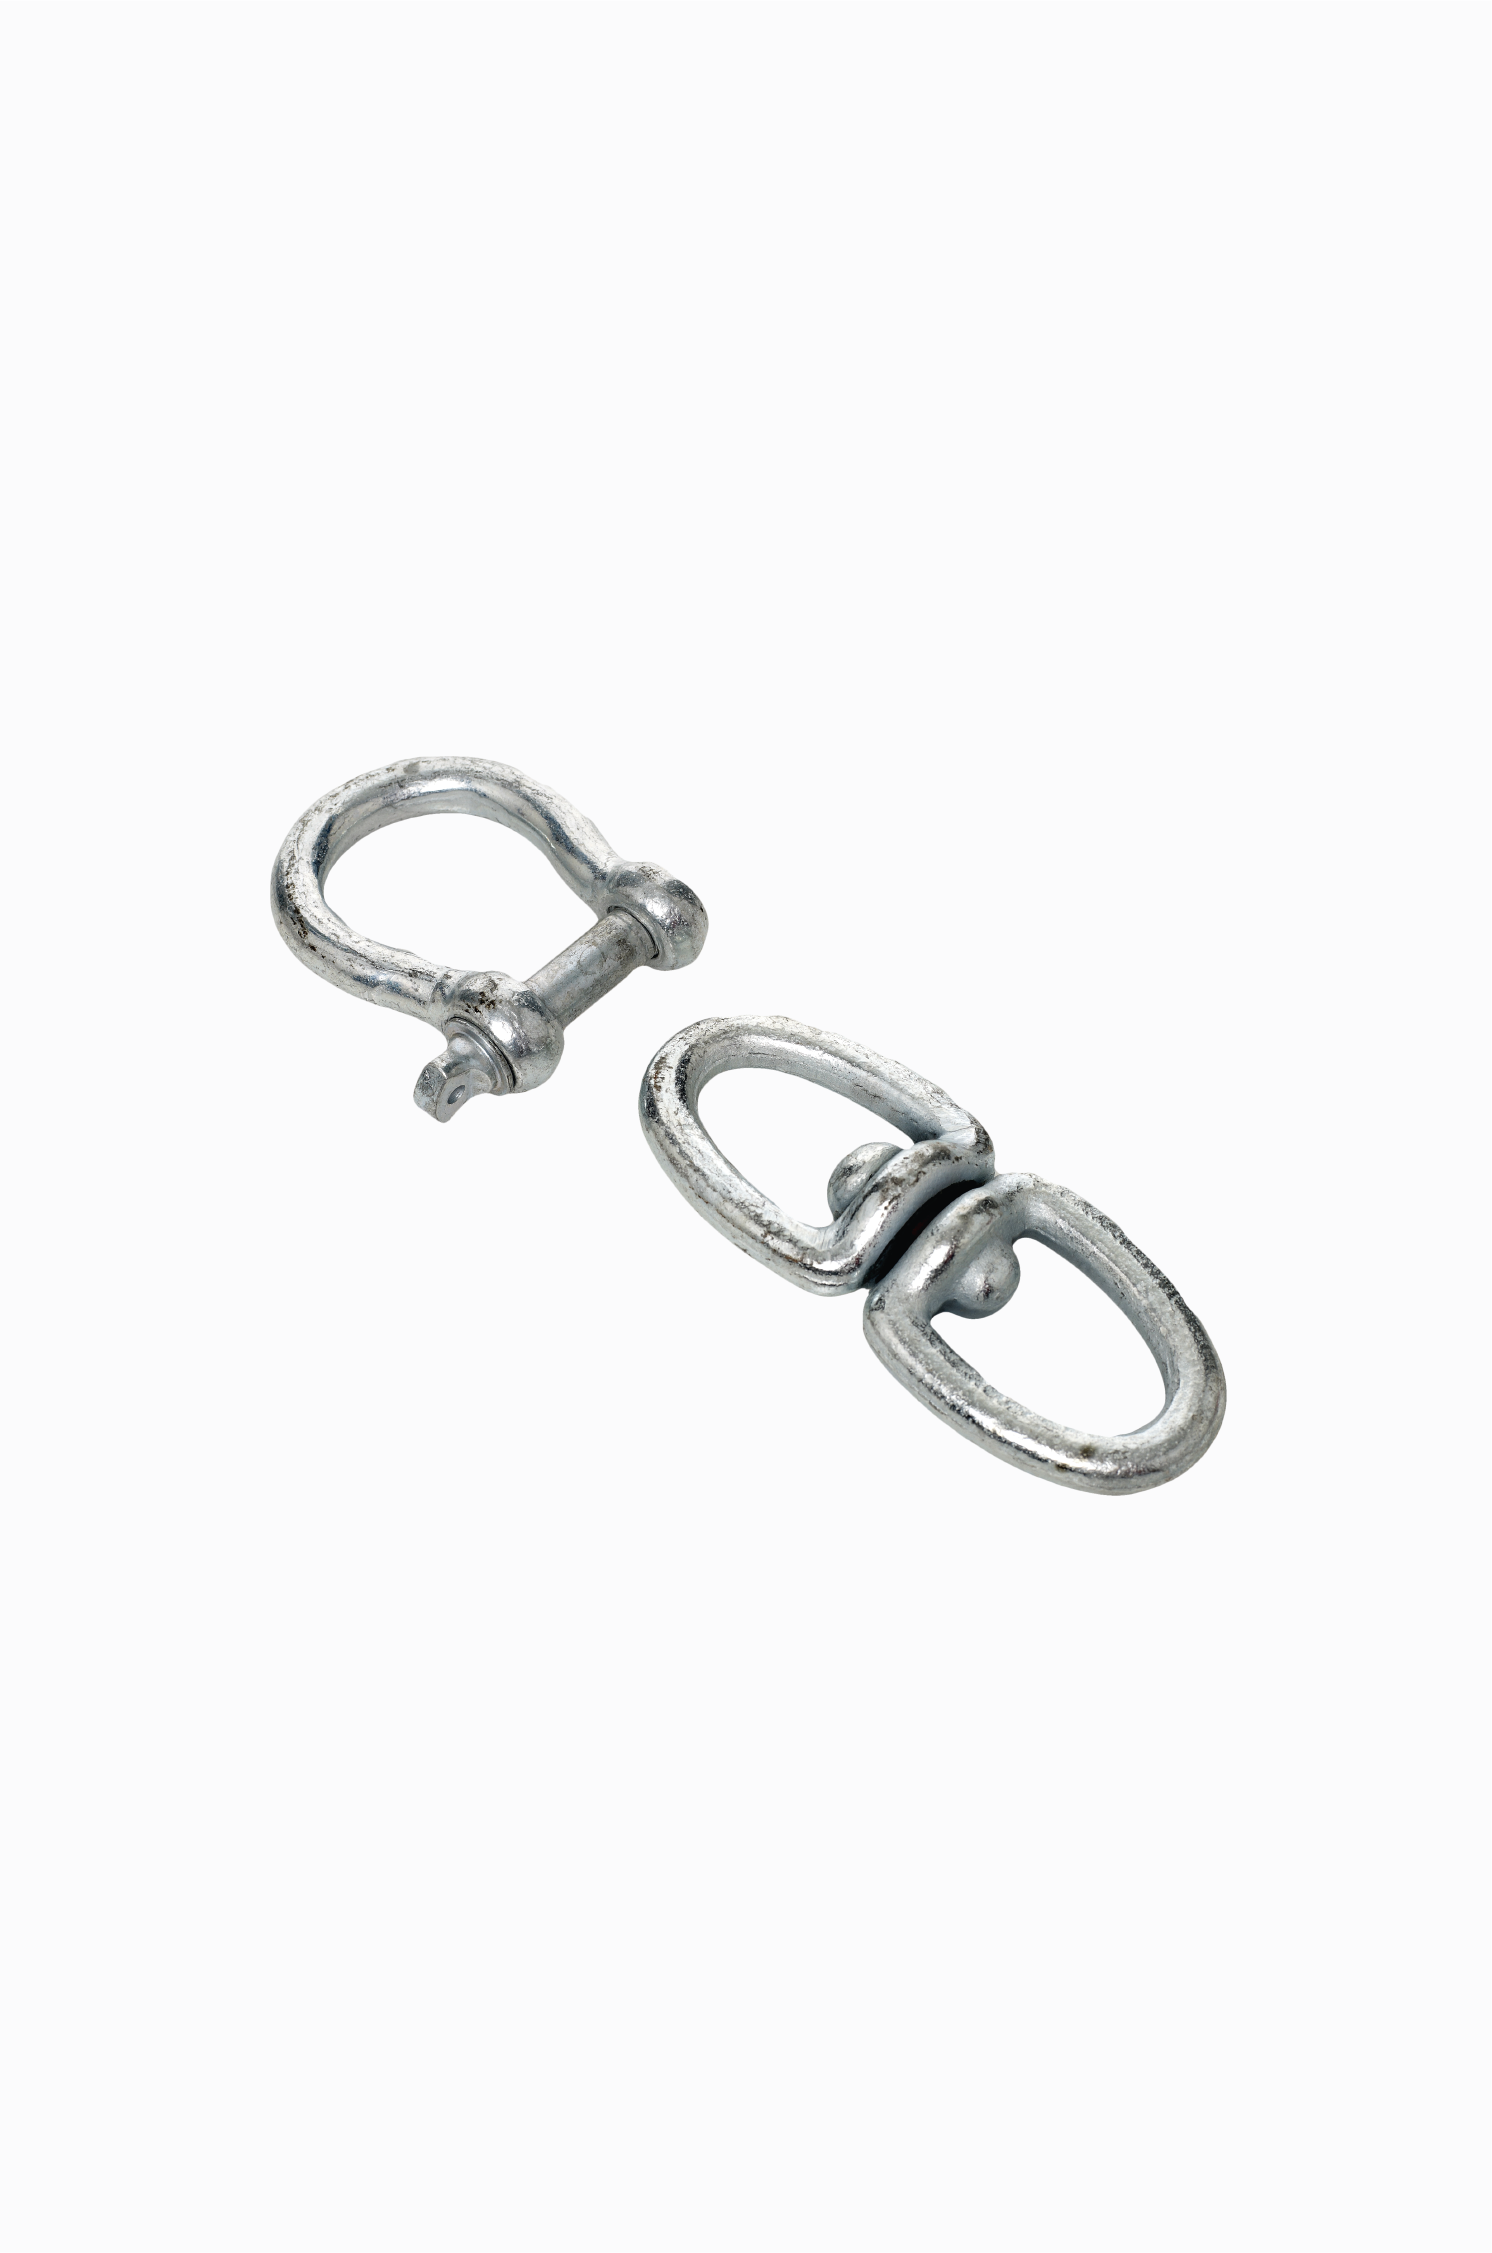 Bowed Shackle And Swivel